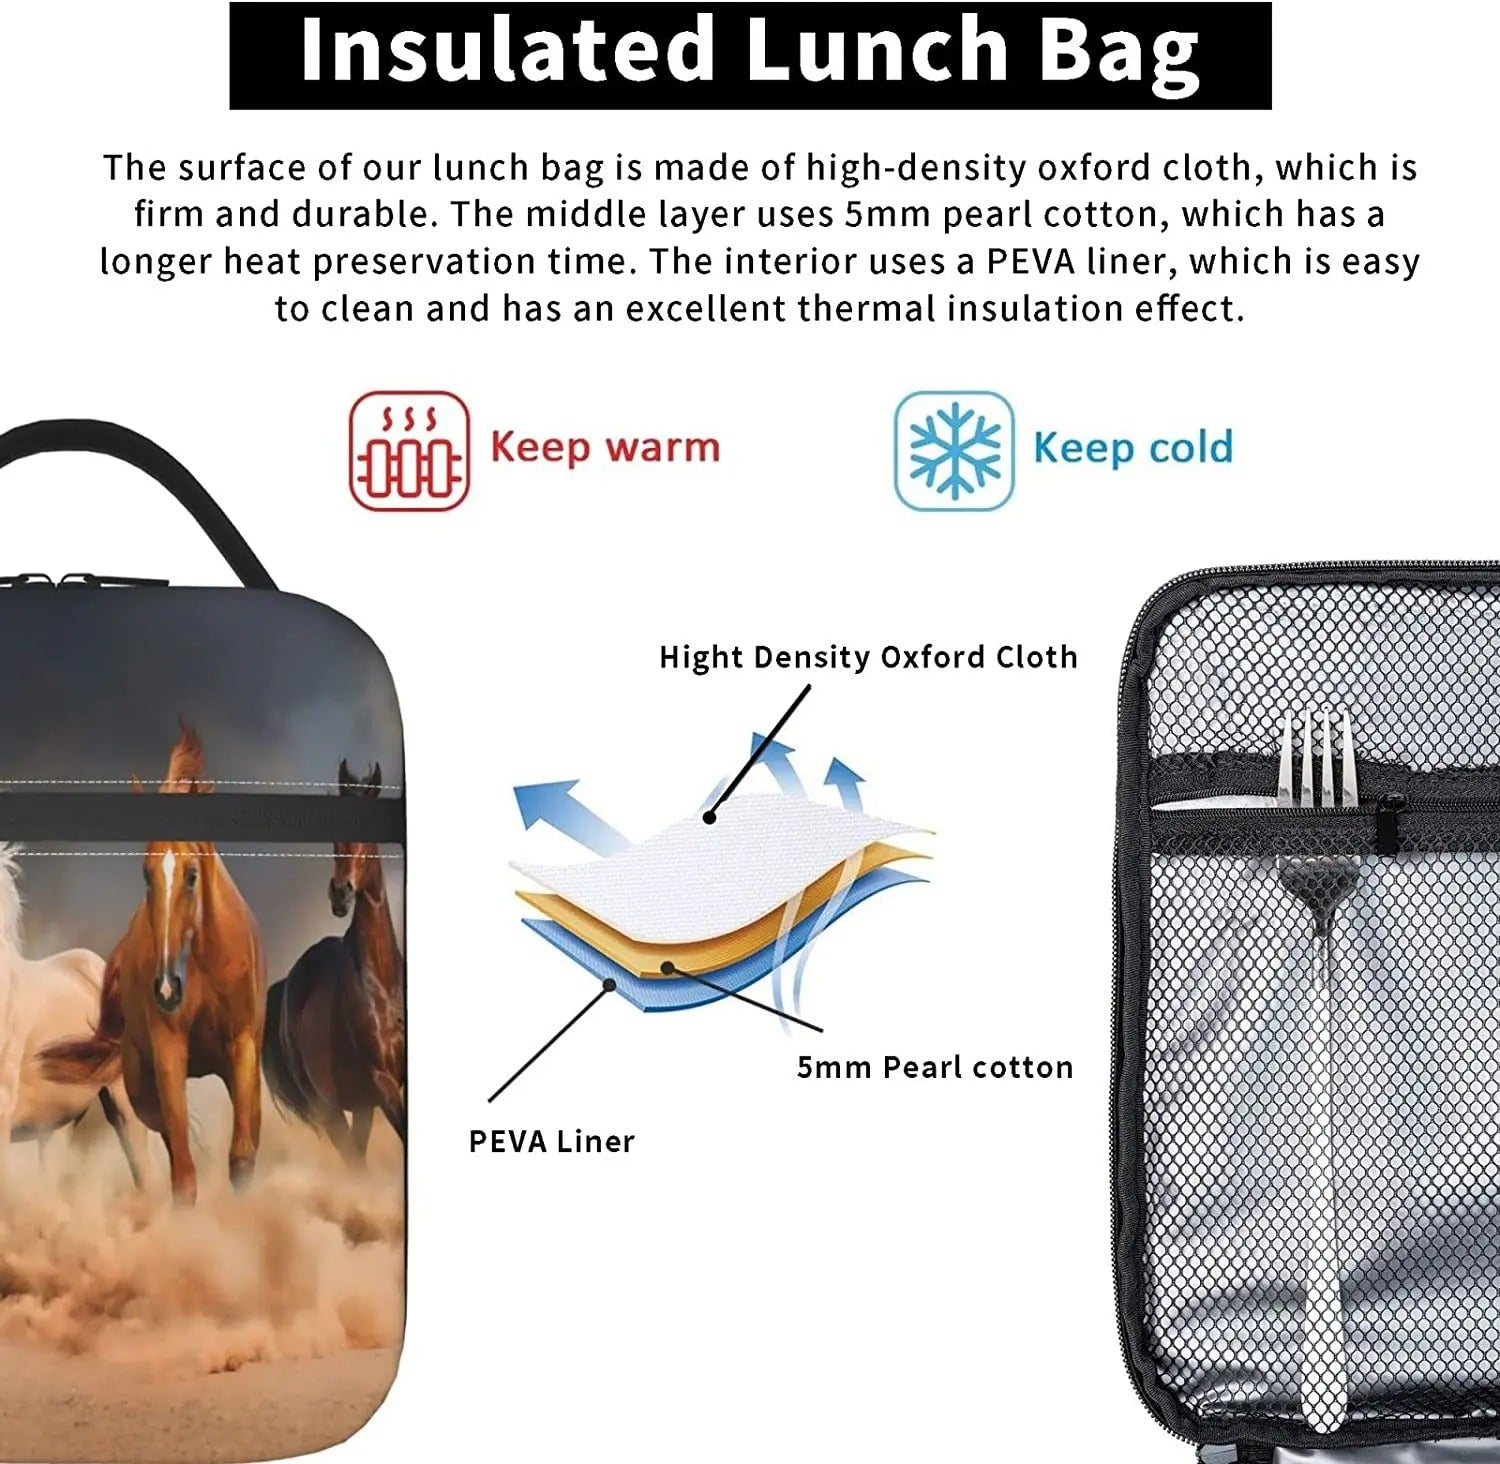 Horse Backpack and Lunchbox - Equine Themed